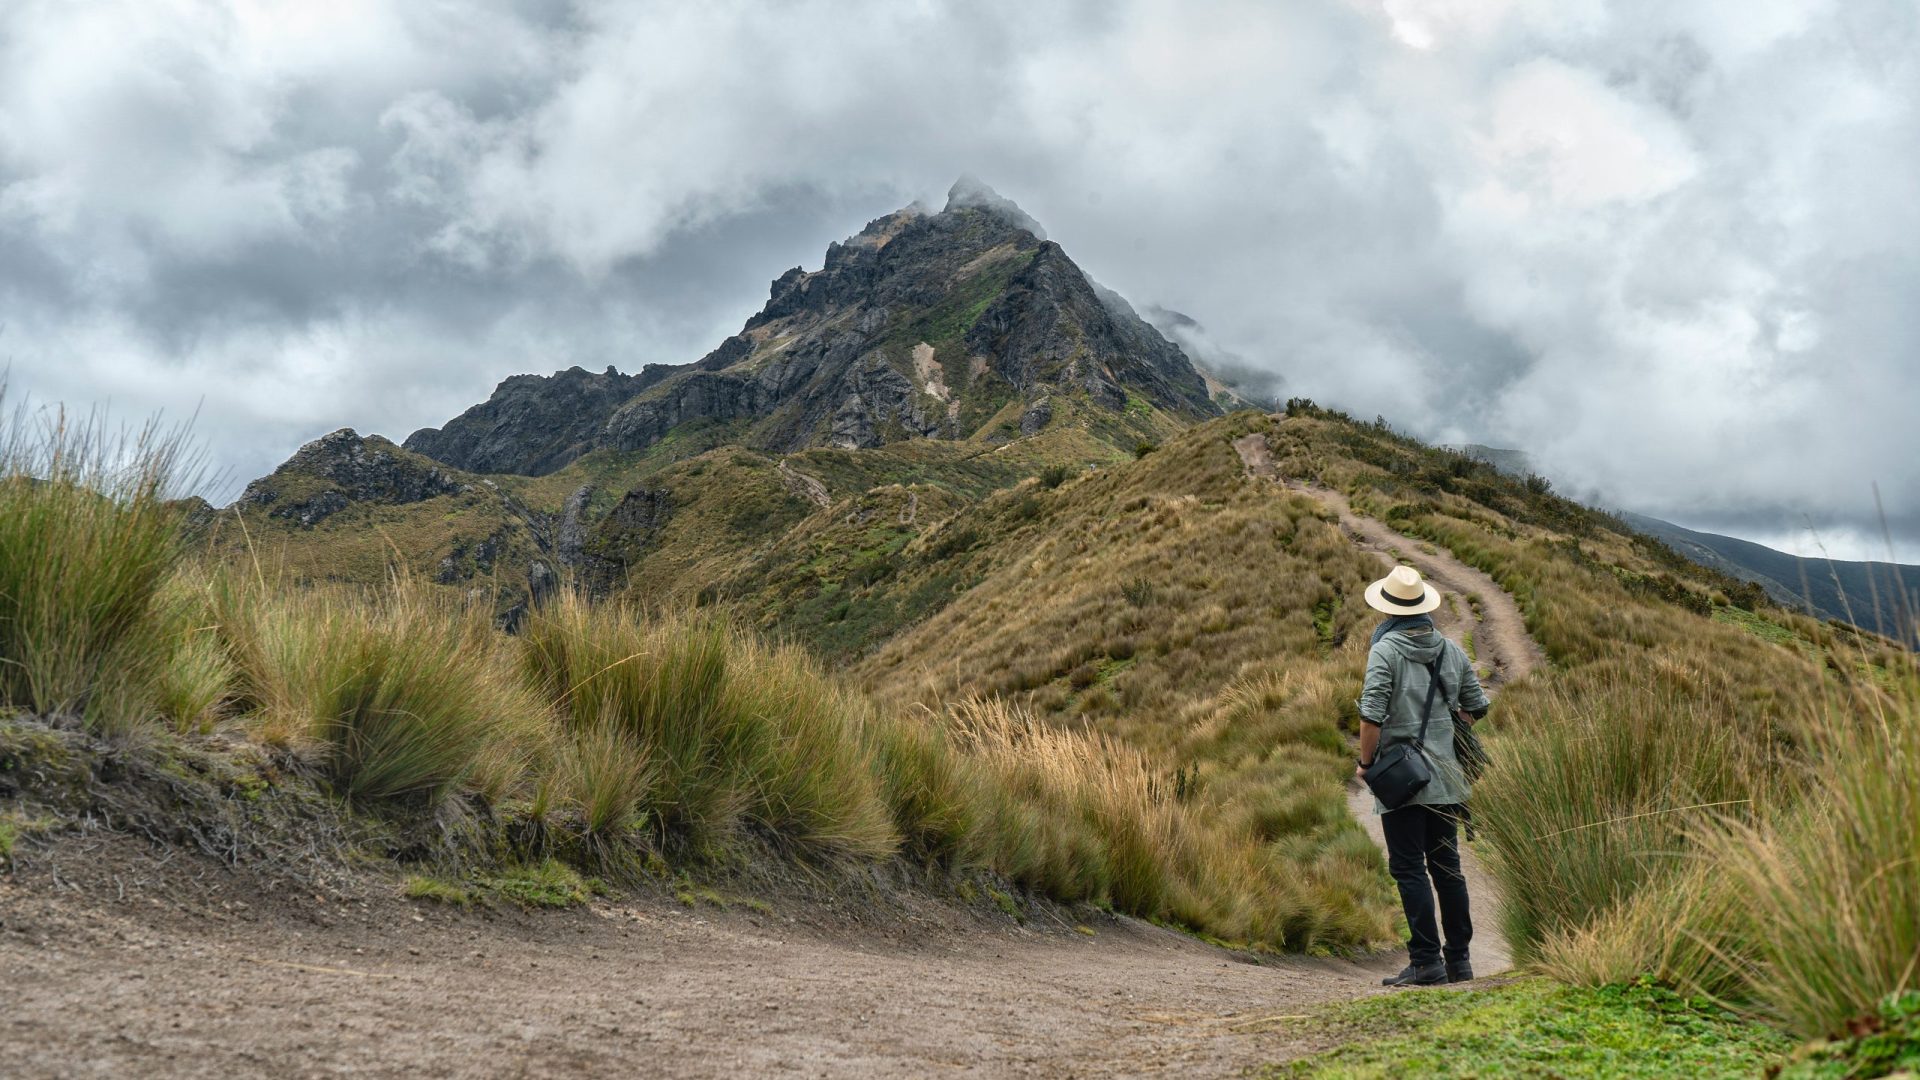 Native plants in the Andes previously thought extinct have been found by researchers—with the help of citizen scientists